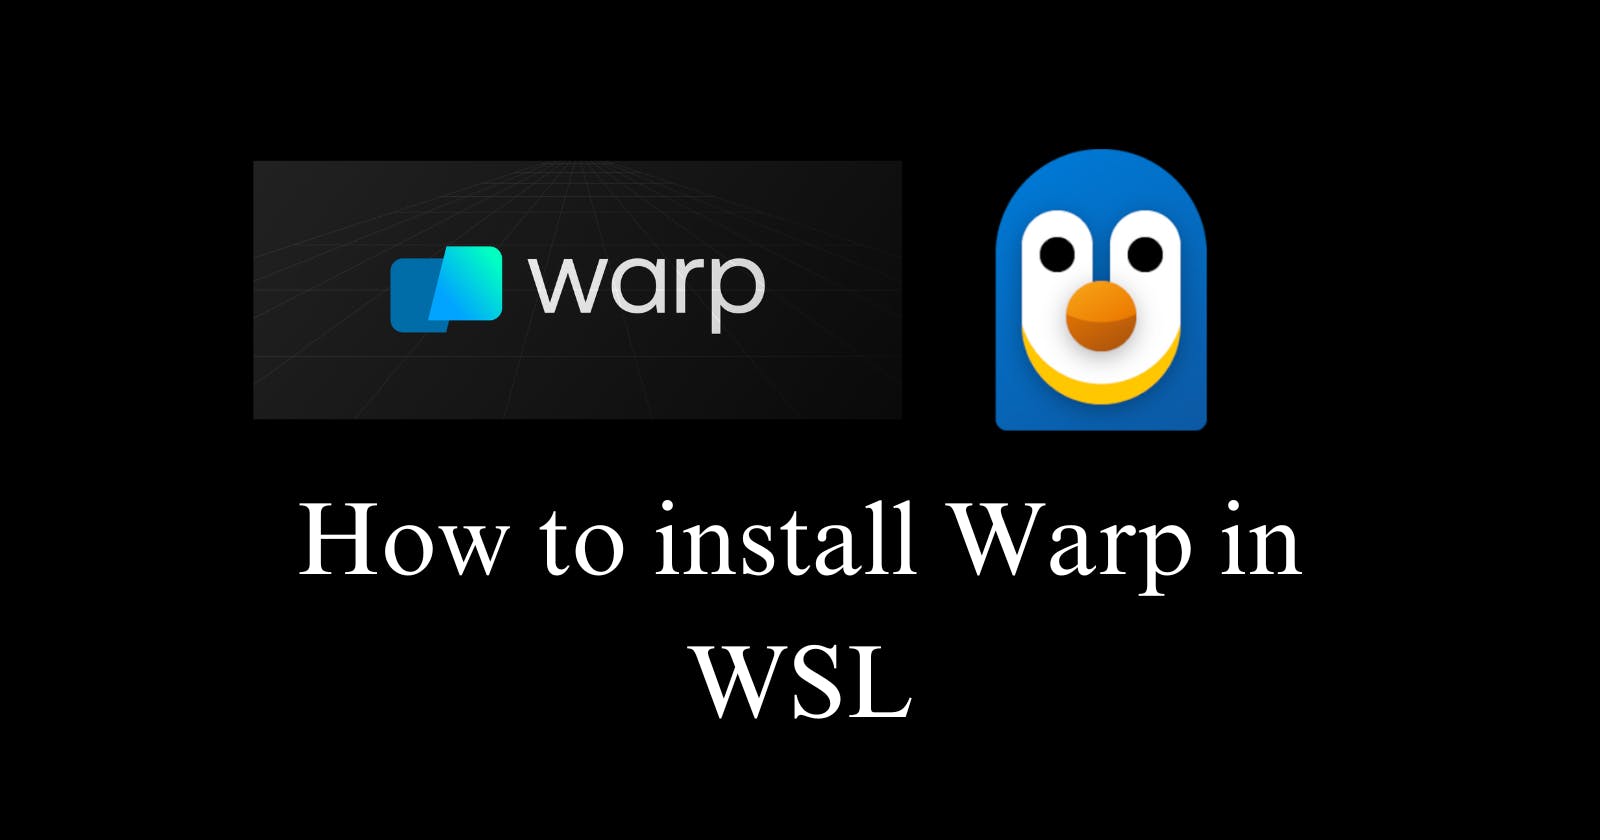 How to install Warp in WSL